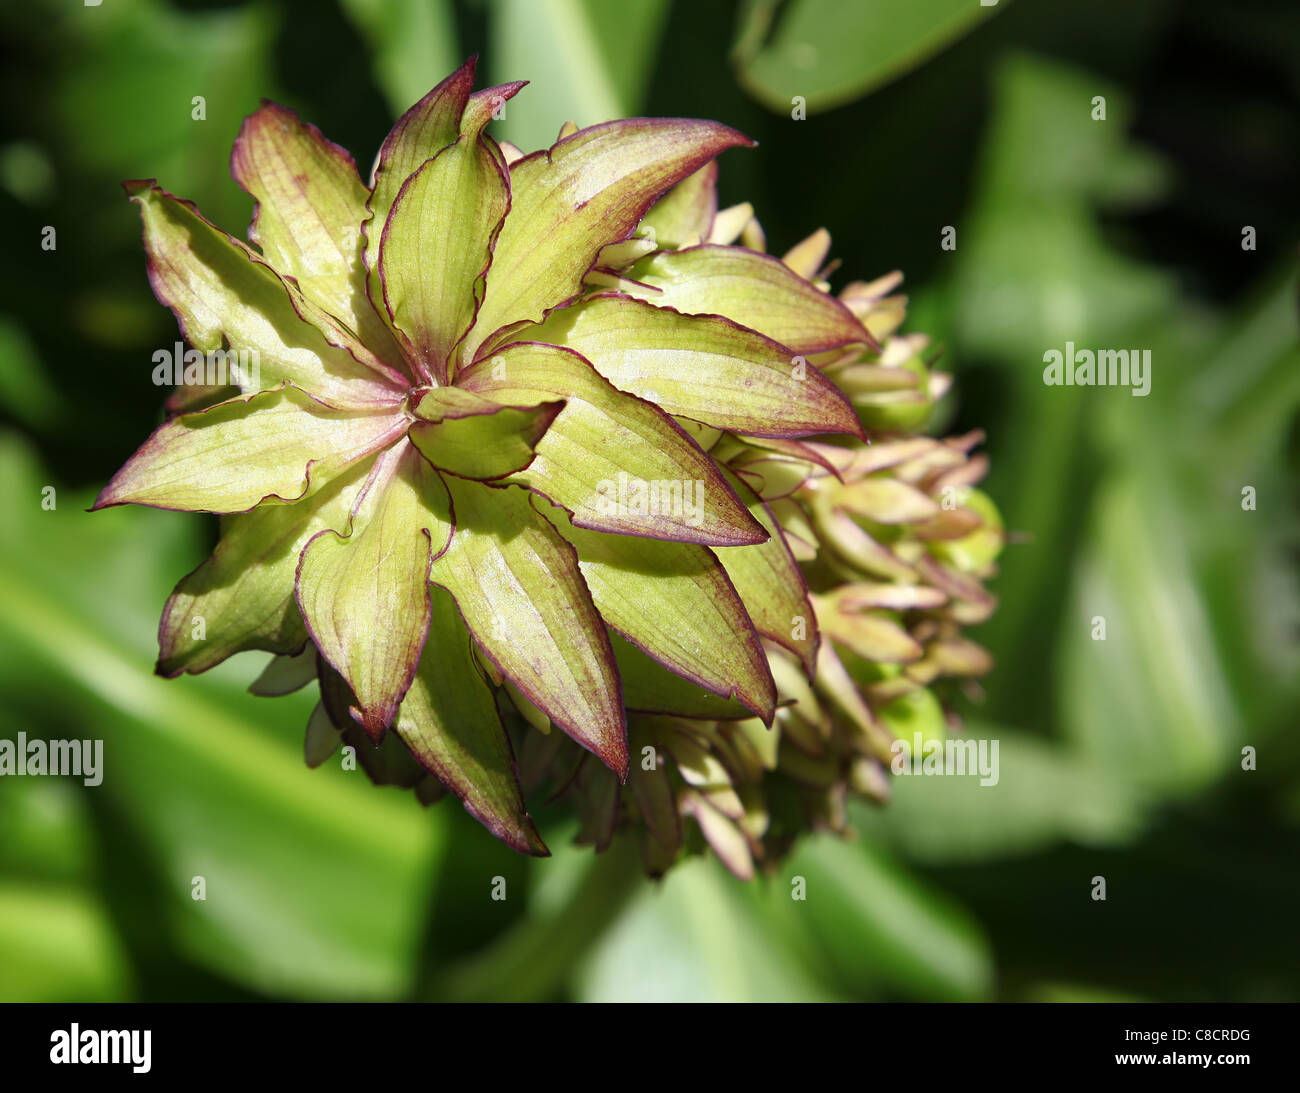 Eucomis is a genus of African bulbs in the asparagus family, commonly referred to as pineapple flowers or pineapple lilies. Stock Photo